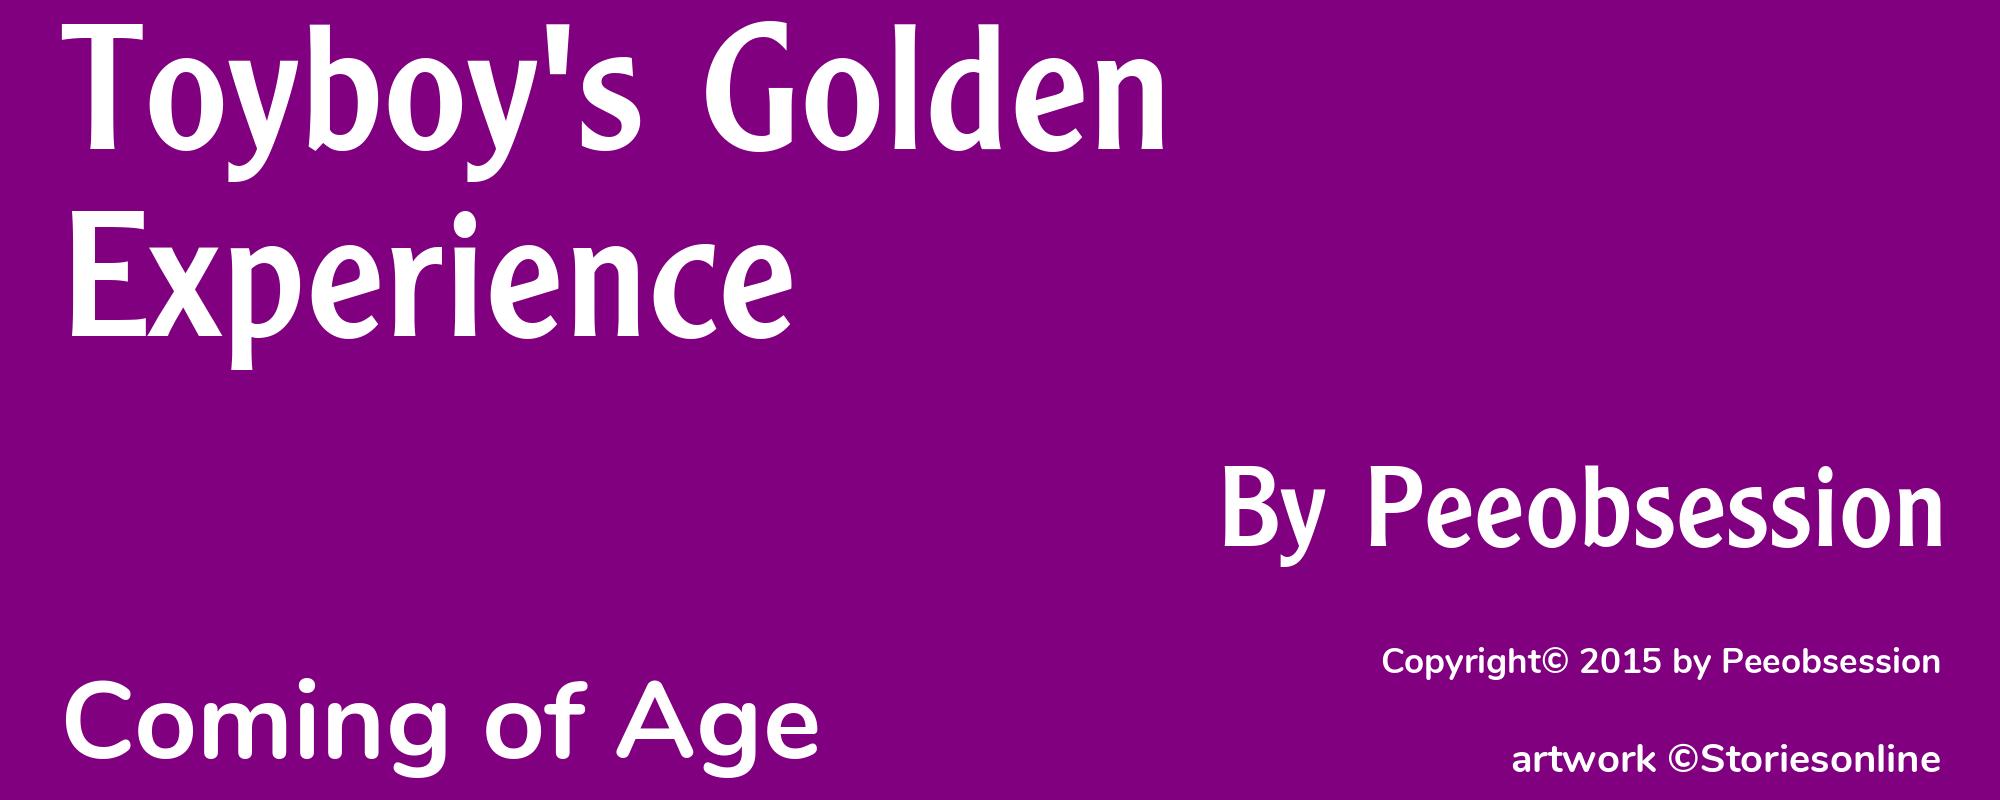 Toyboy's Golden Experience - Cover